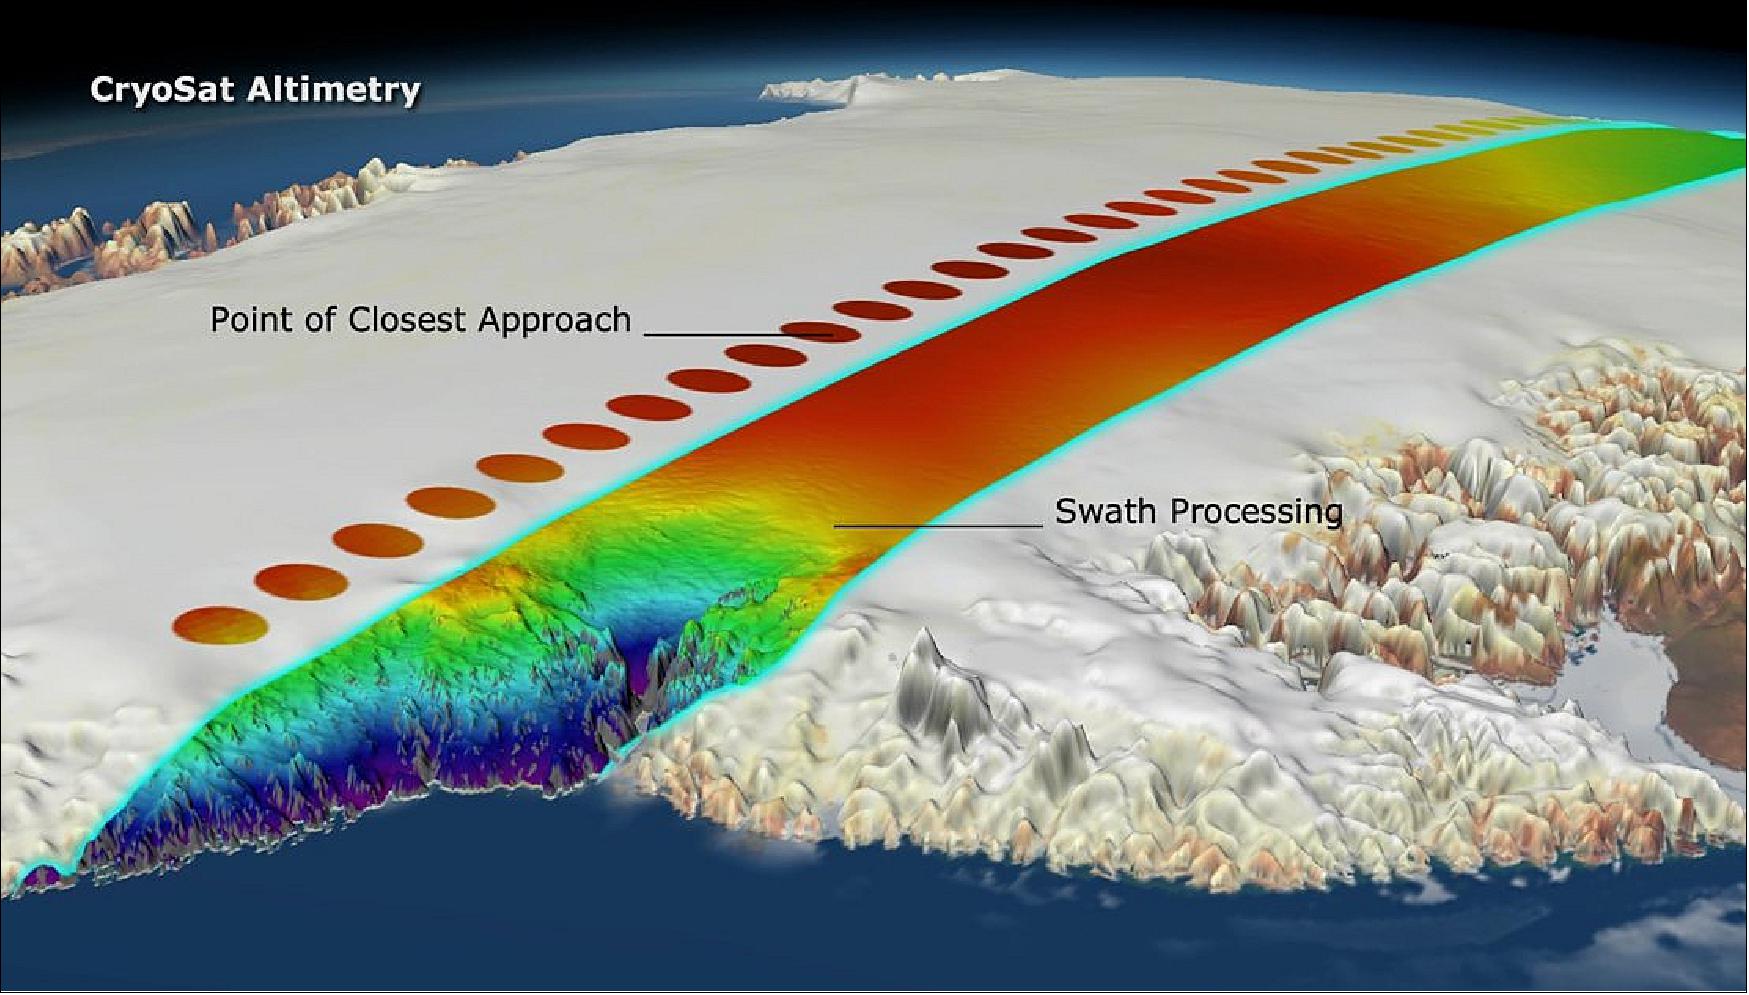 Figure 44: The technique of swath processing differs from conventional radar altimetry. Using CryoSat-2's novel interferometric mode, whole swaths, rather than single points, of elevations can be computed. This is yielding more detail that ever before on how glacial ice is changing (image credit: ESA/Planetary Visions)